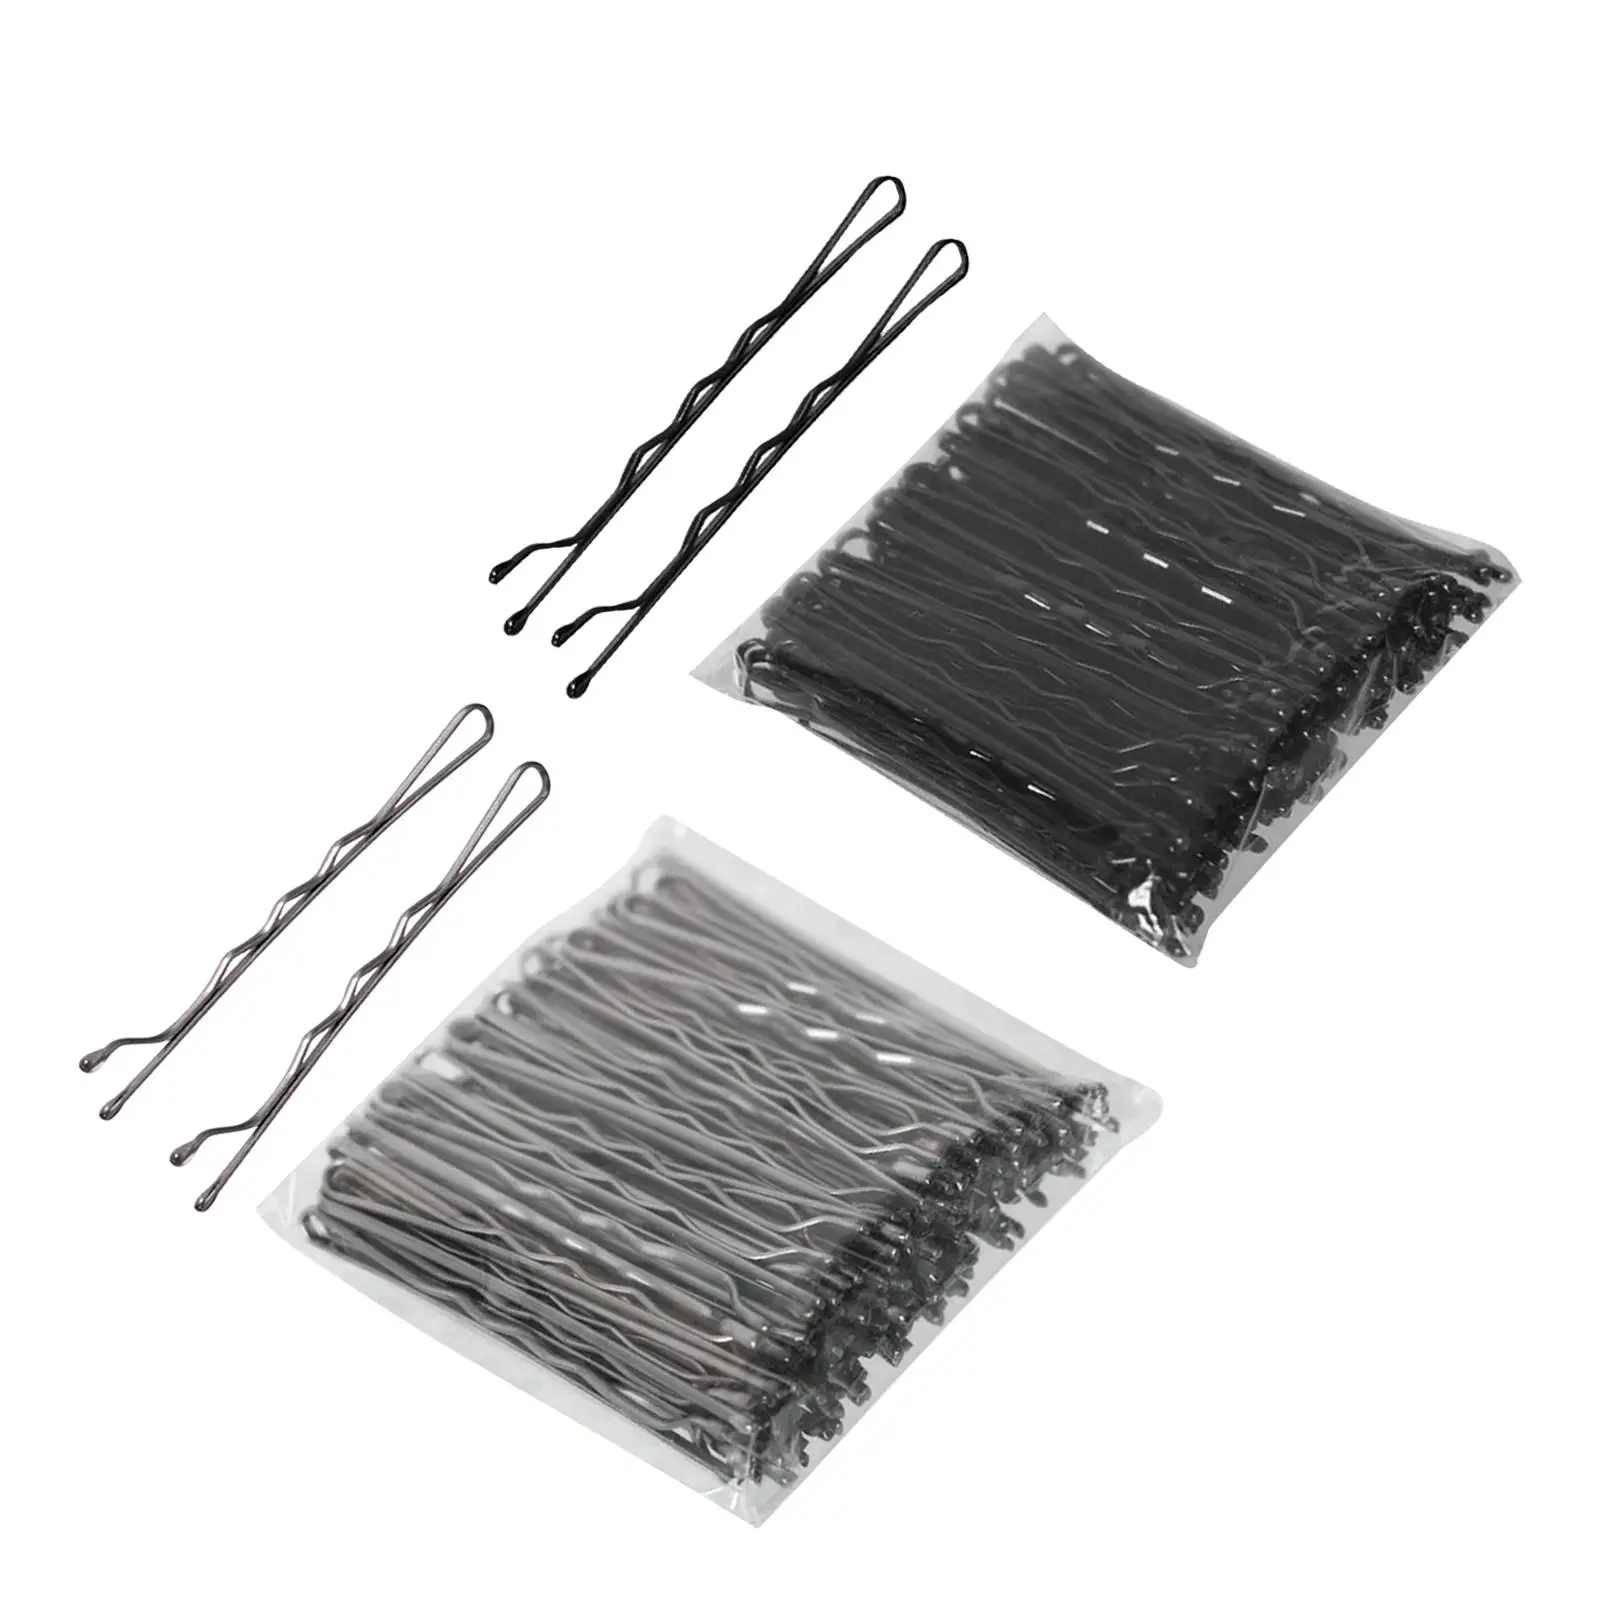 100Pcs Hair Pin Keep Hairs in Place Hair Accessories for Salon Hairstyling Hairdressing Lady